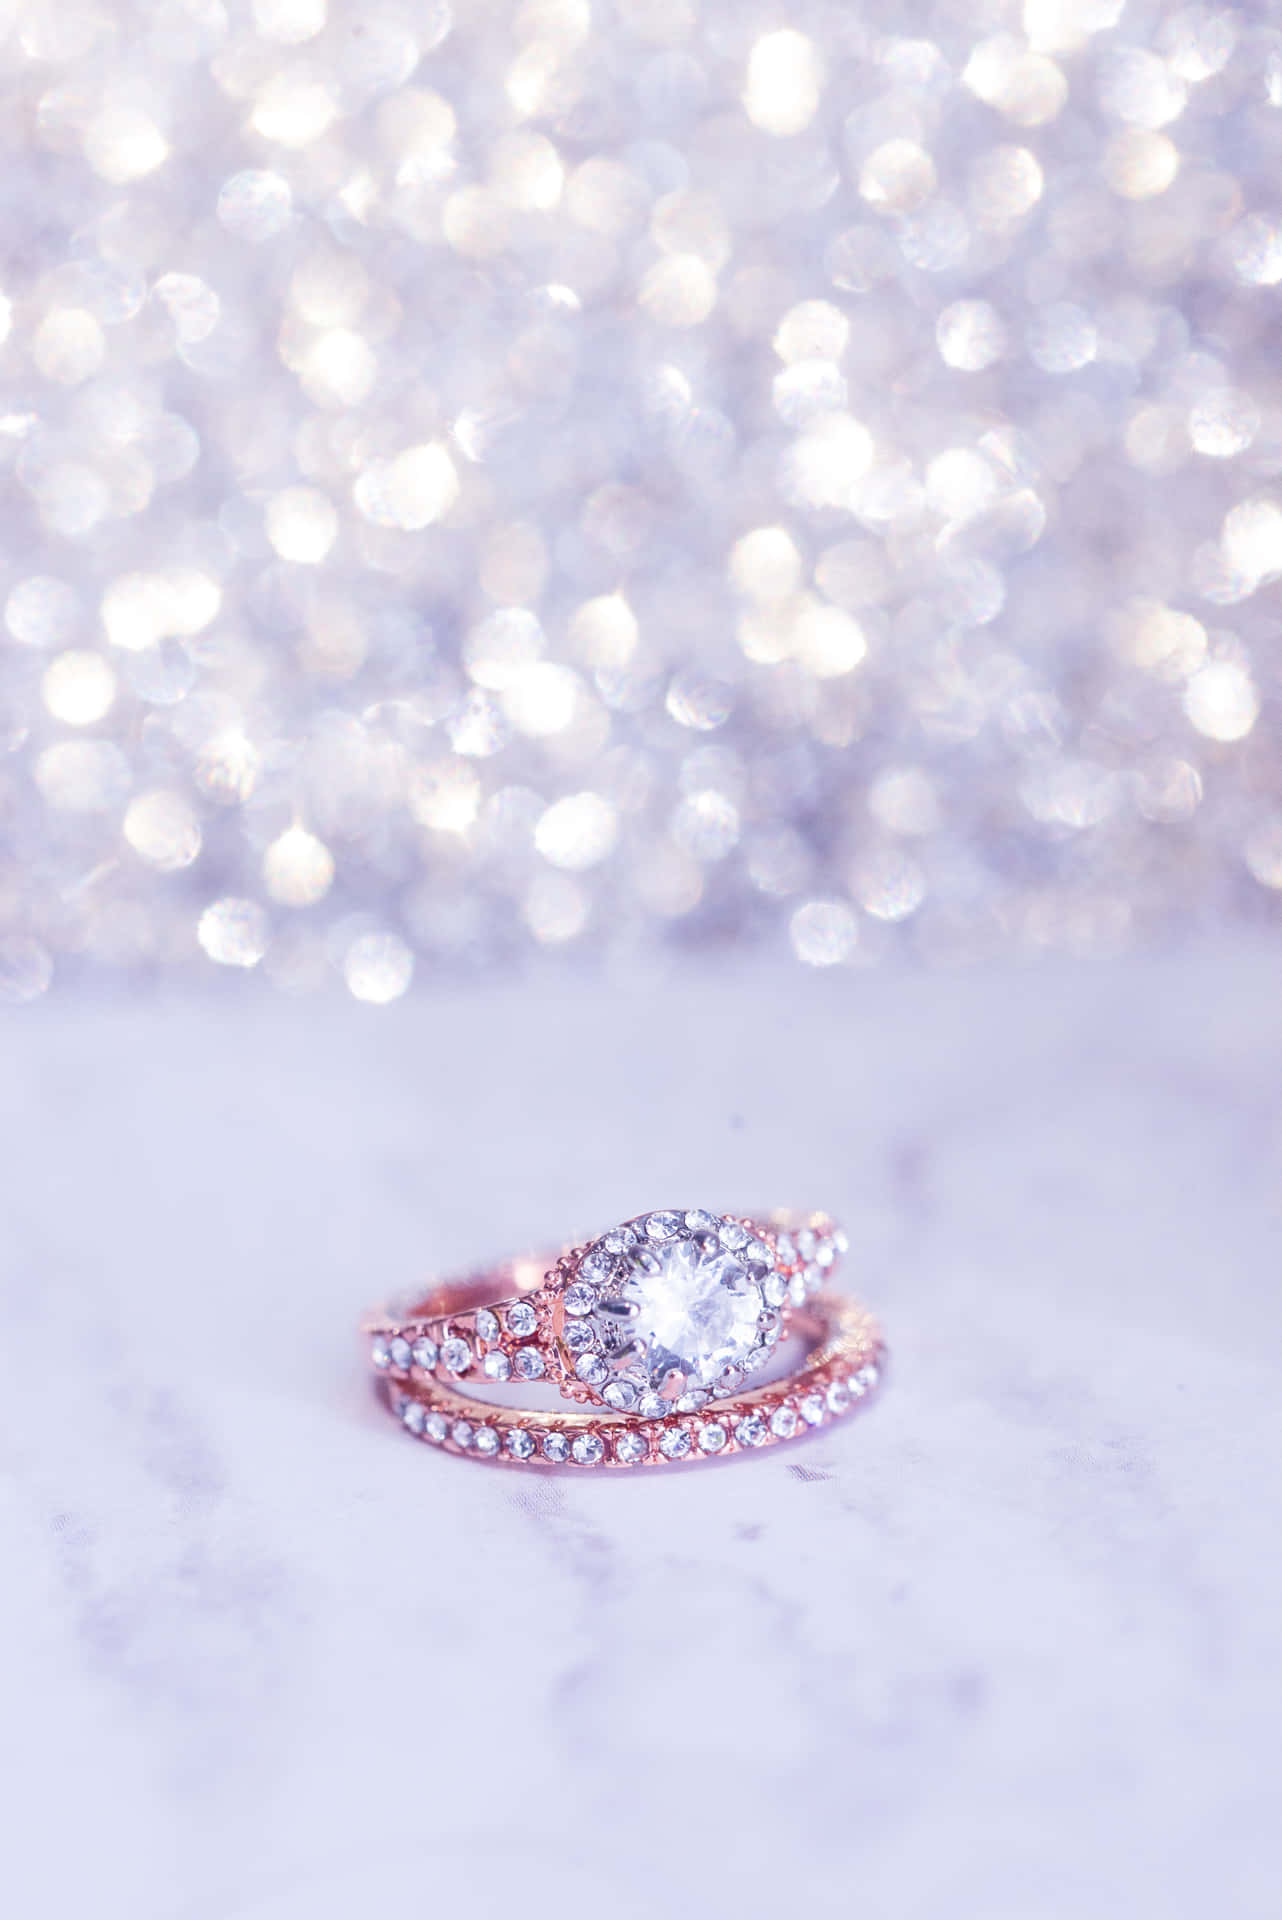 A Rose Gold Engagement Ring With A Diamond In The Middle